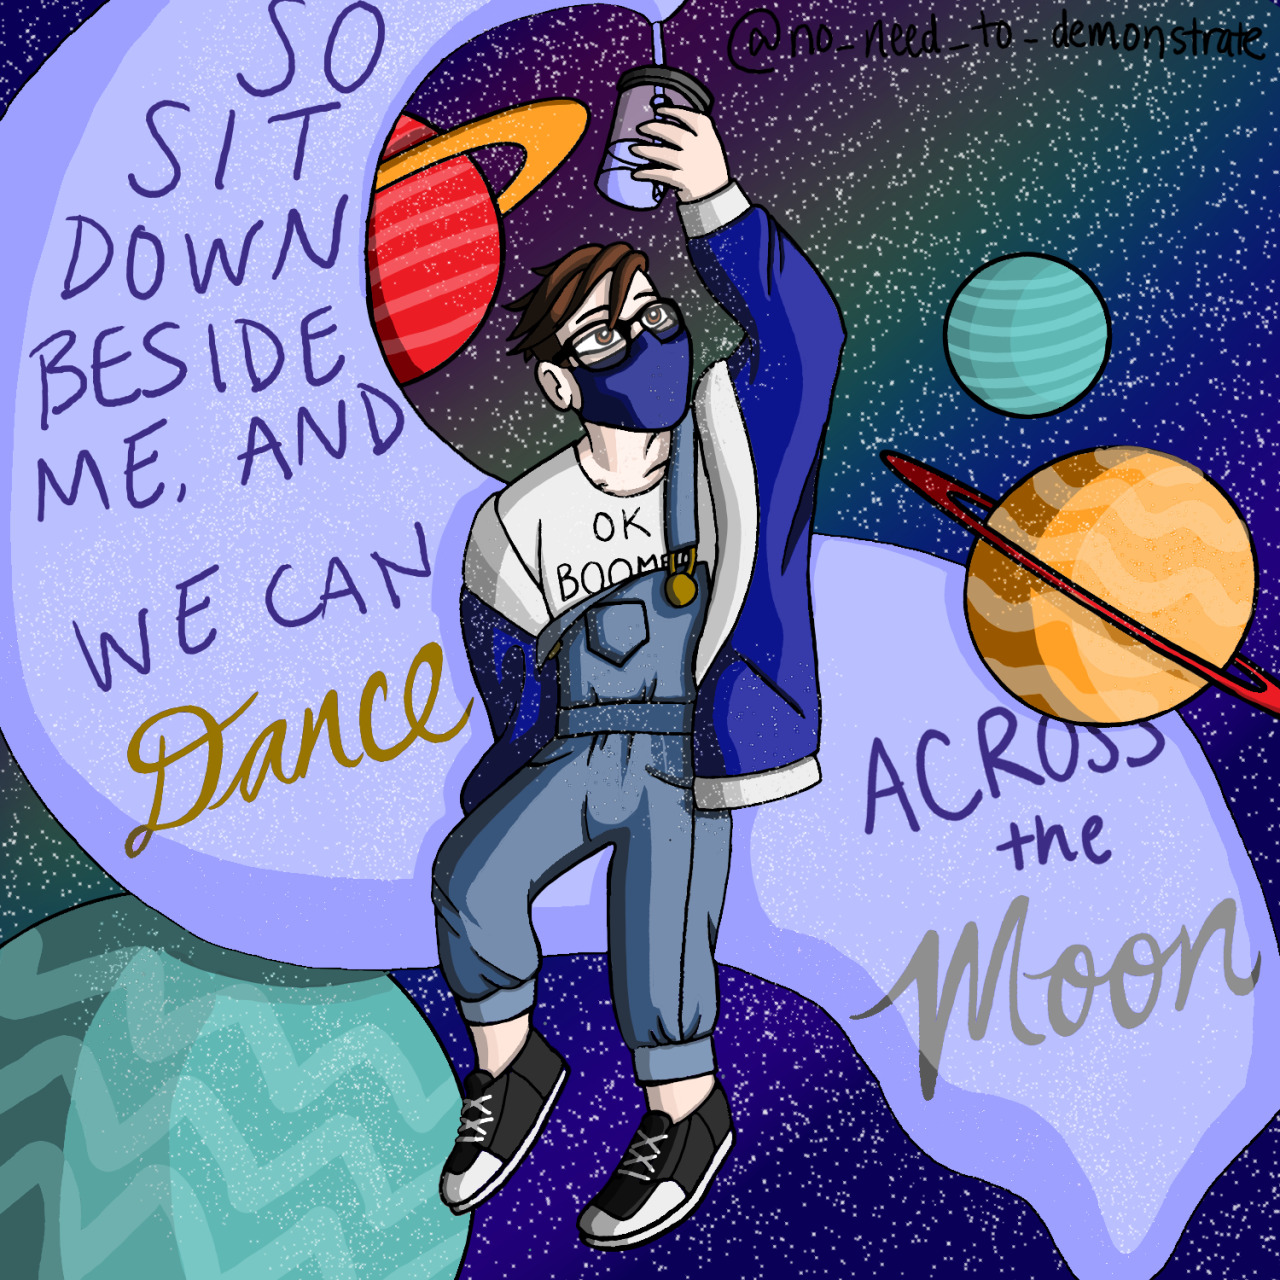 saxophonehero2016:
“This is a piece I drew a version of by @itsabelle.arts on Instagram :)
“So sit down beside me, and we can dance across the moon” ”